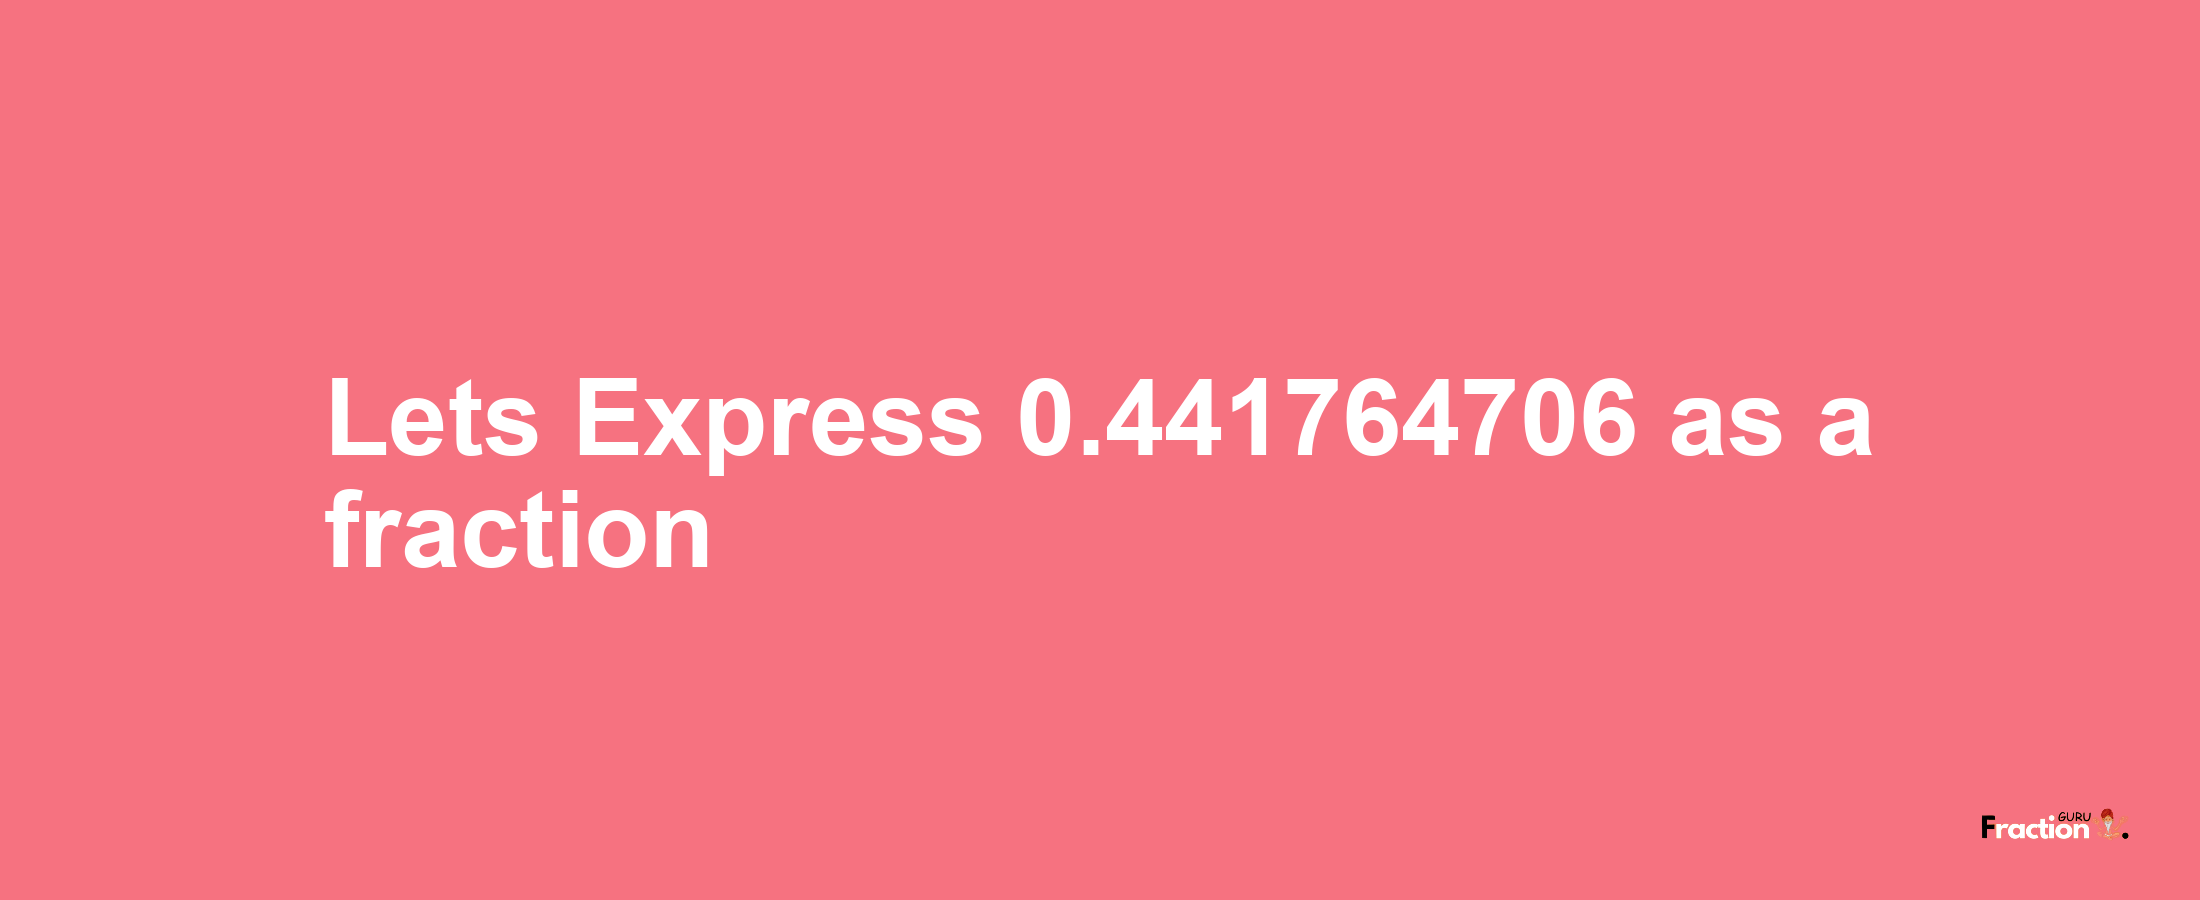 Lets Express 0.441764706 as afraction